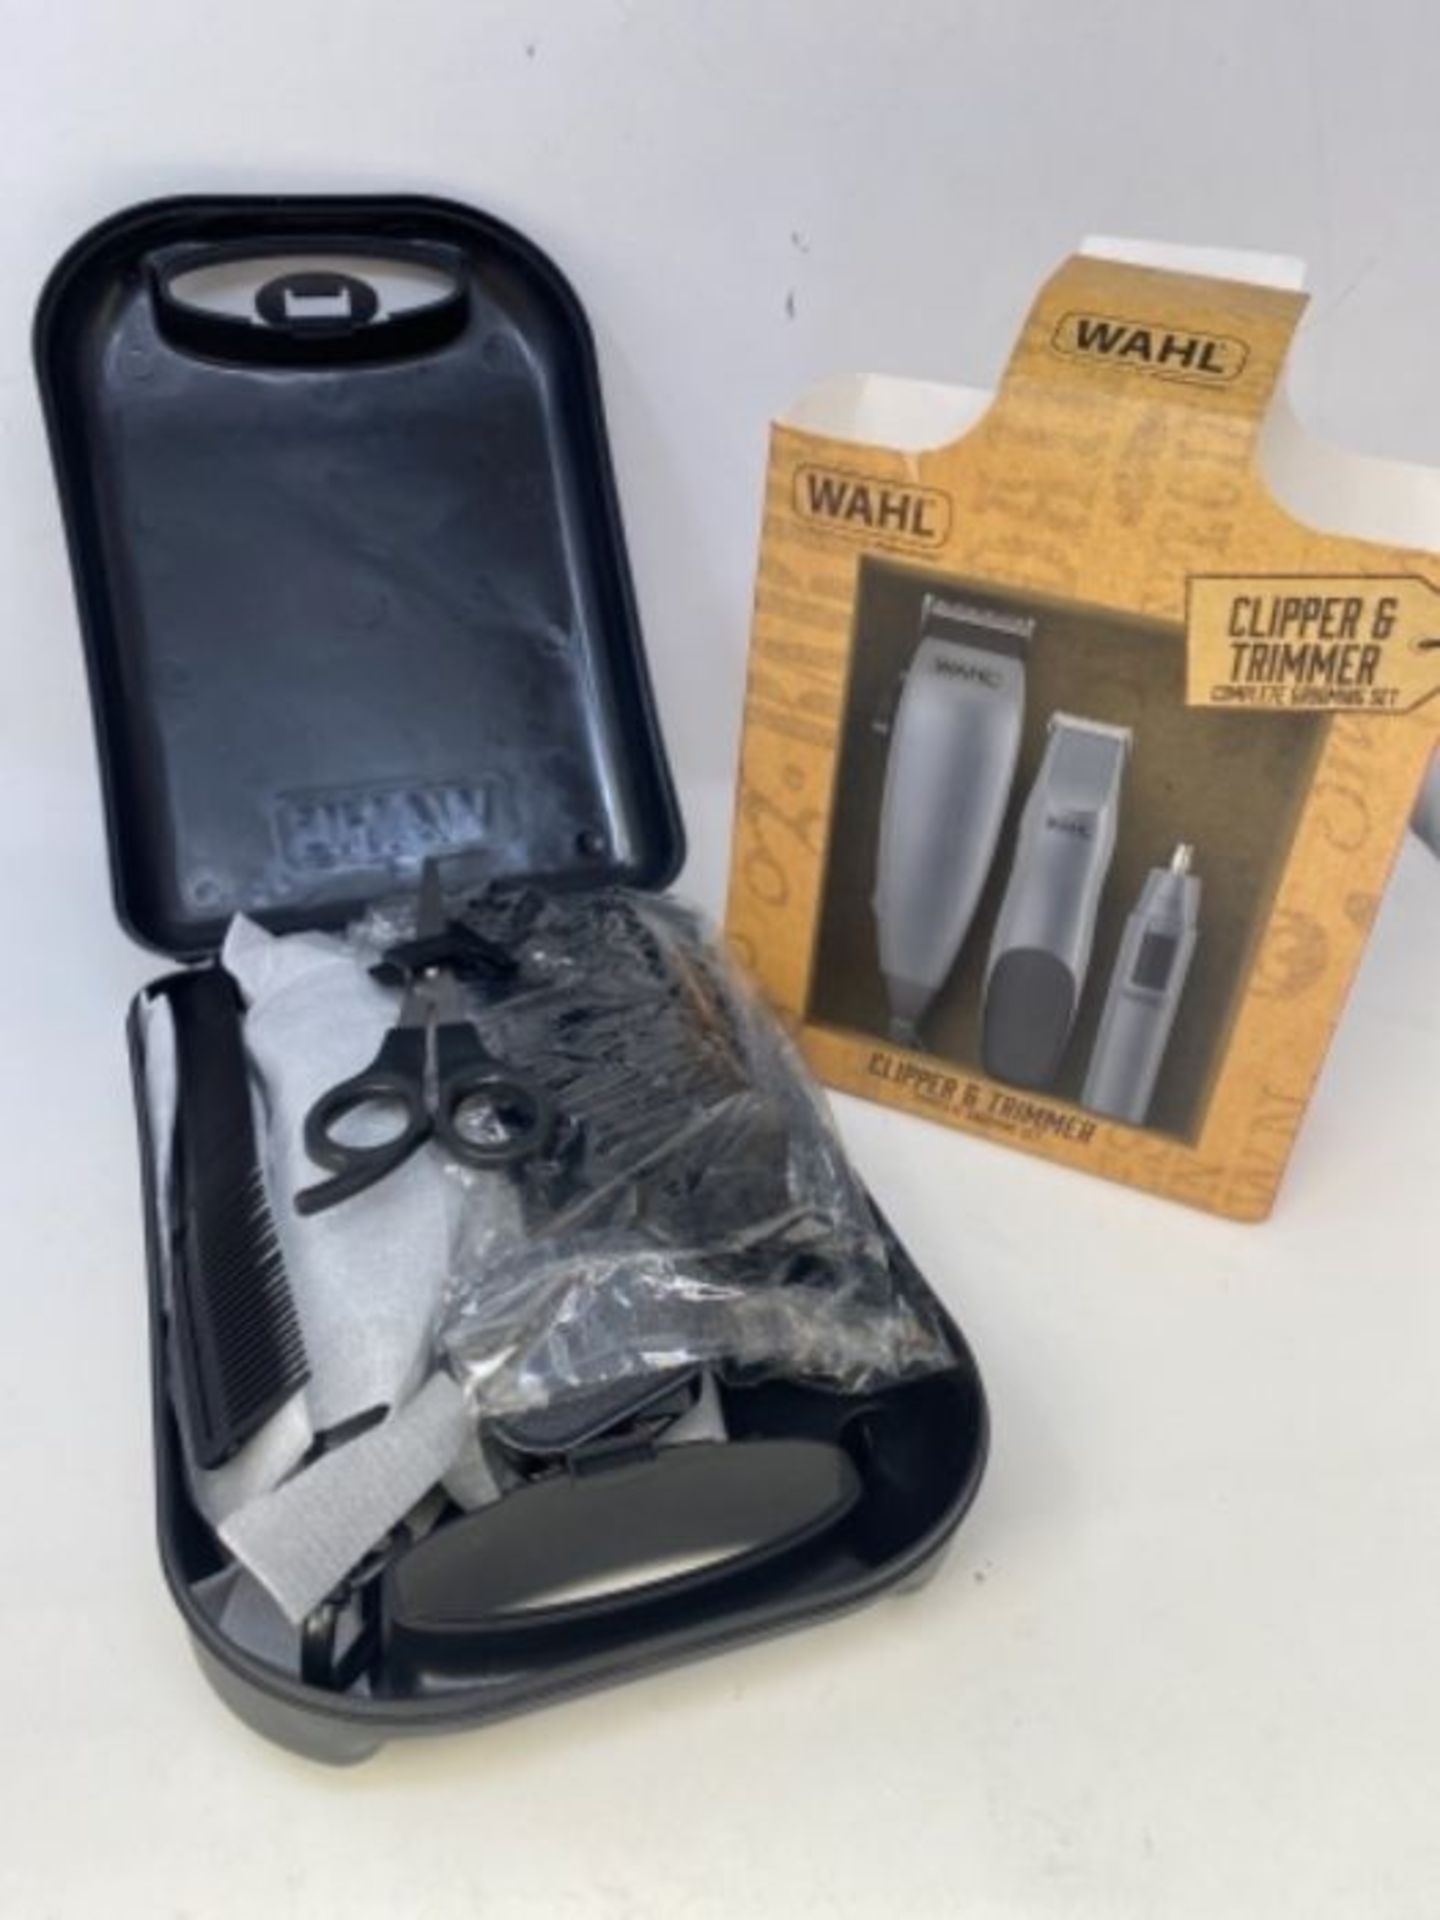 Wahl Hair Clippers for Men, 3-in-1 Corded Head Shaver Men's Hair Clippers in Storage C - Image 2 of 2